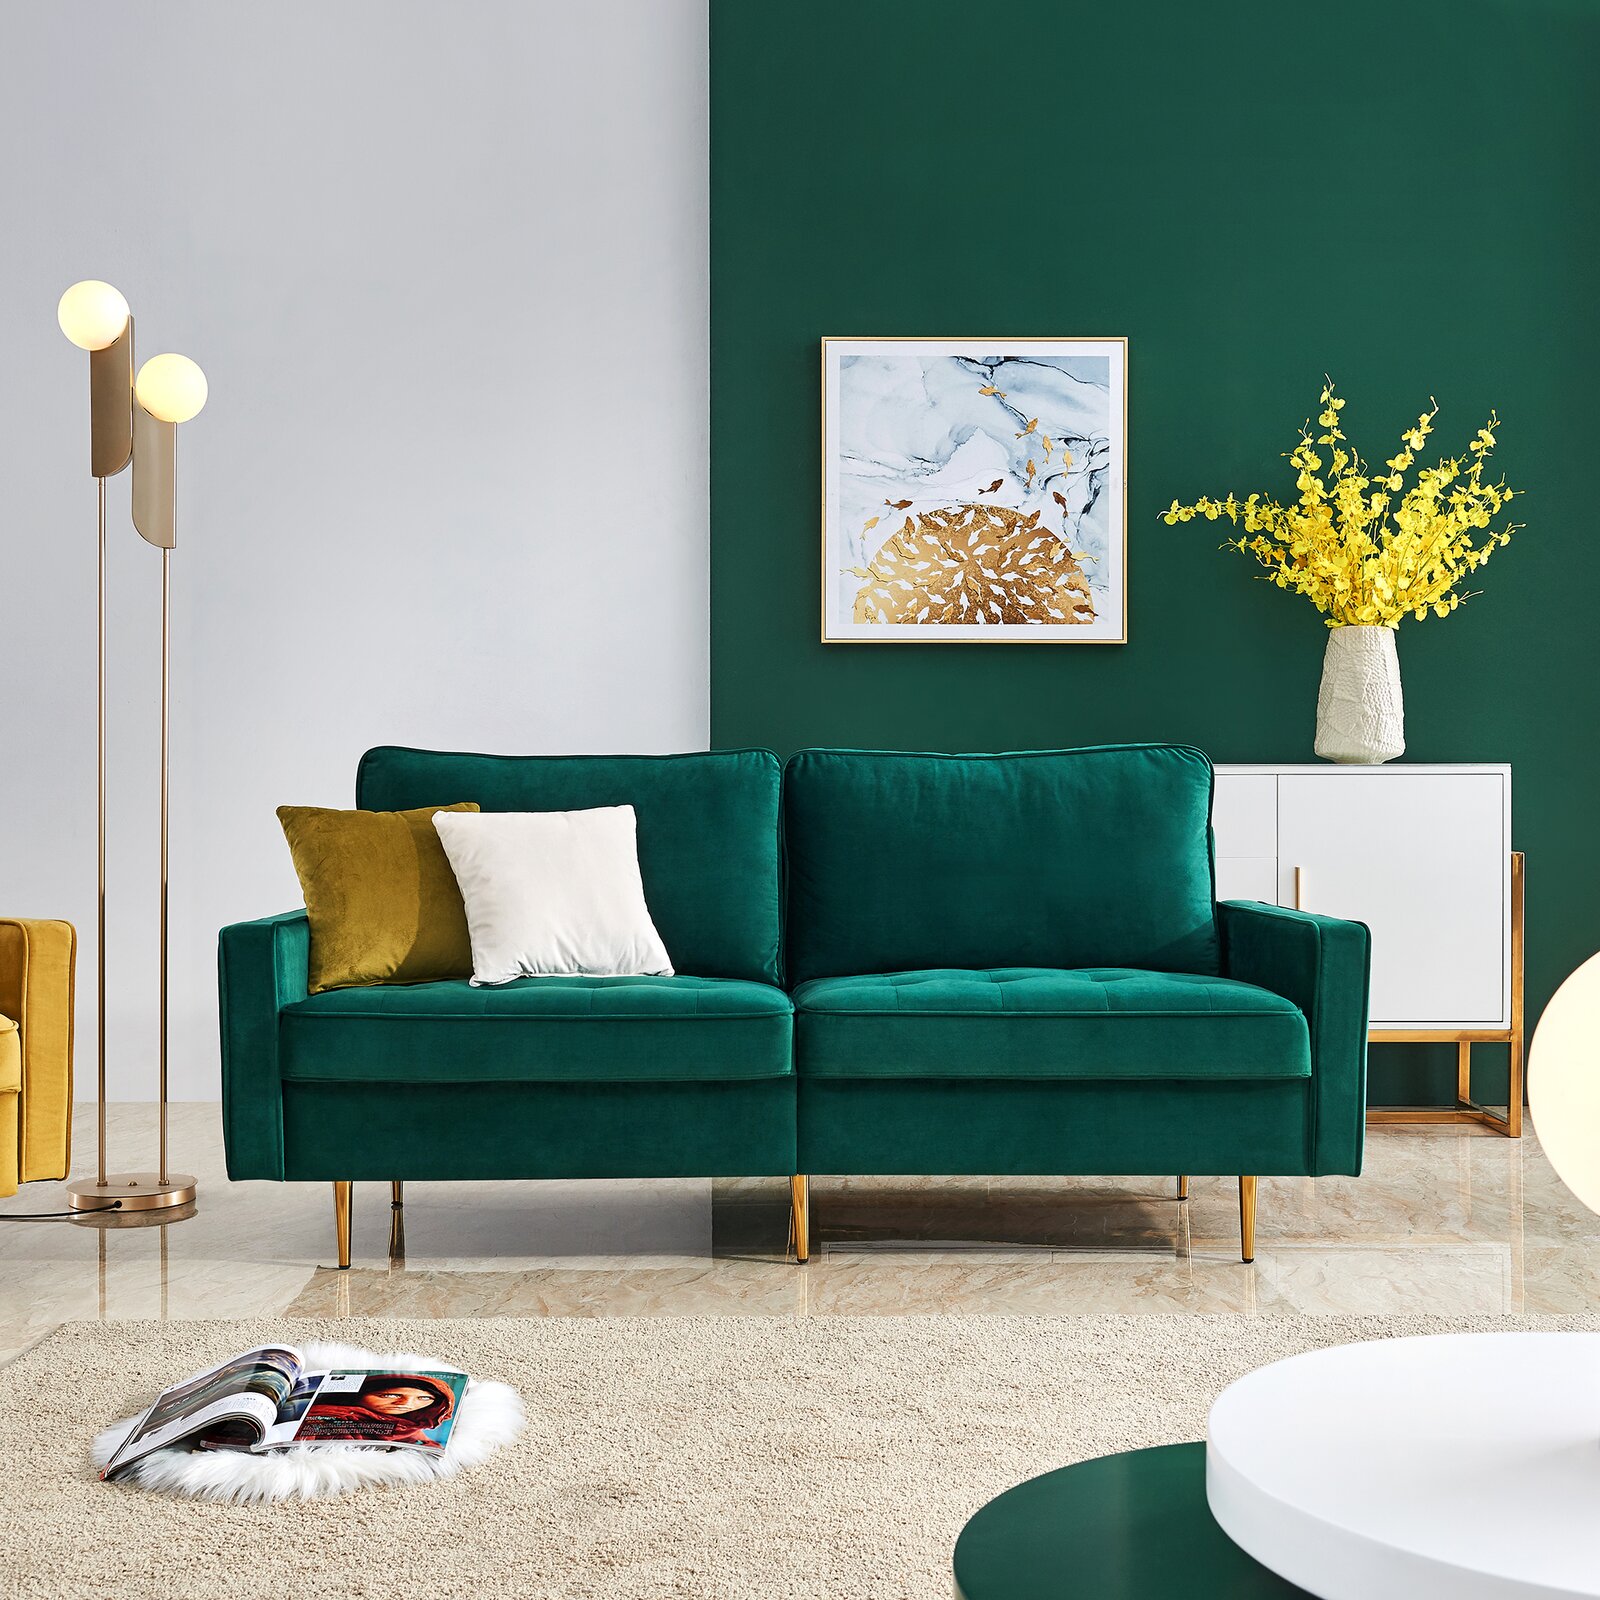 Emerald accents in the living room